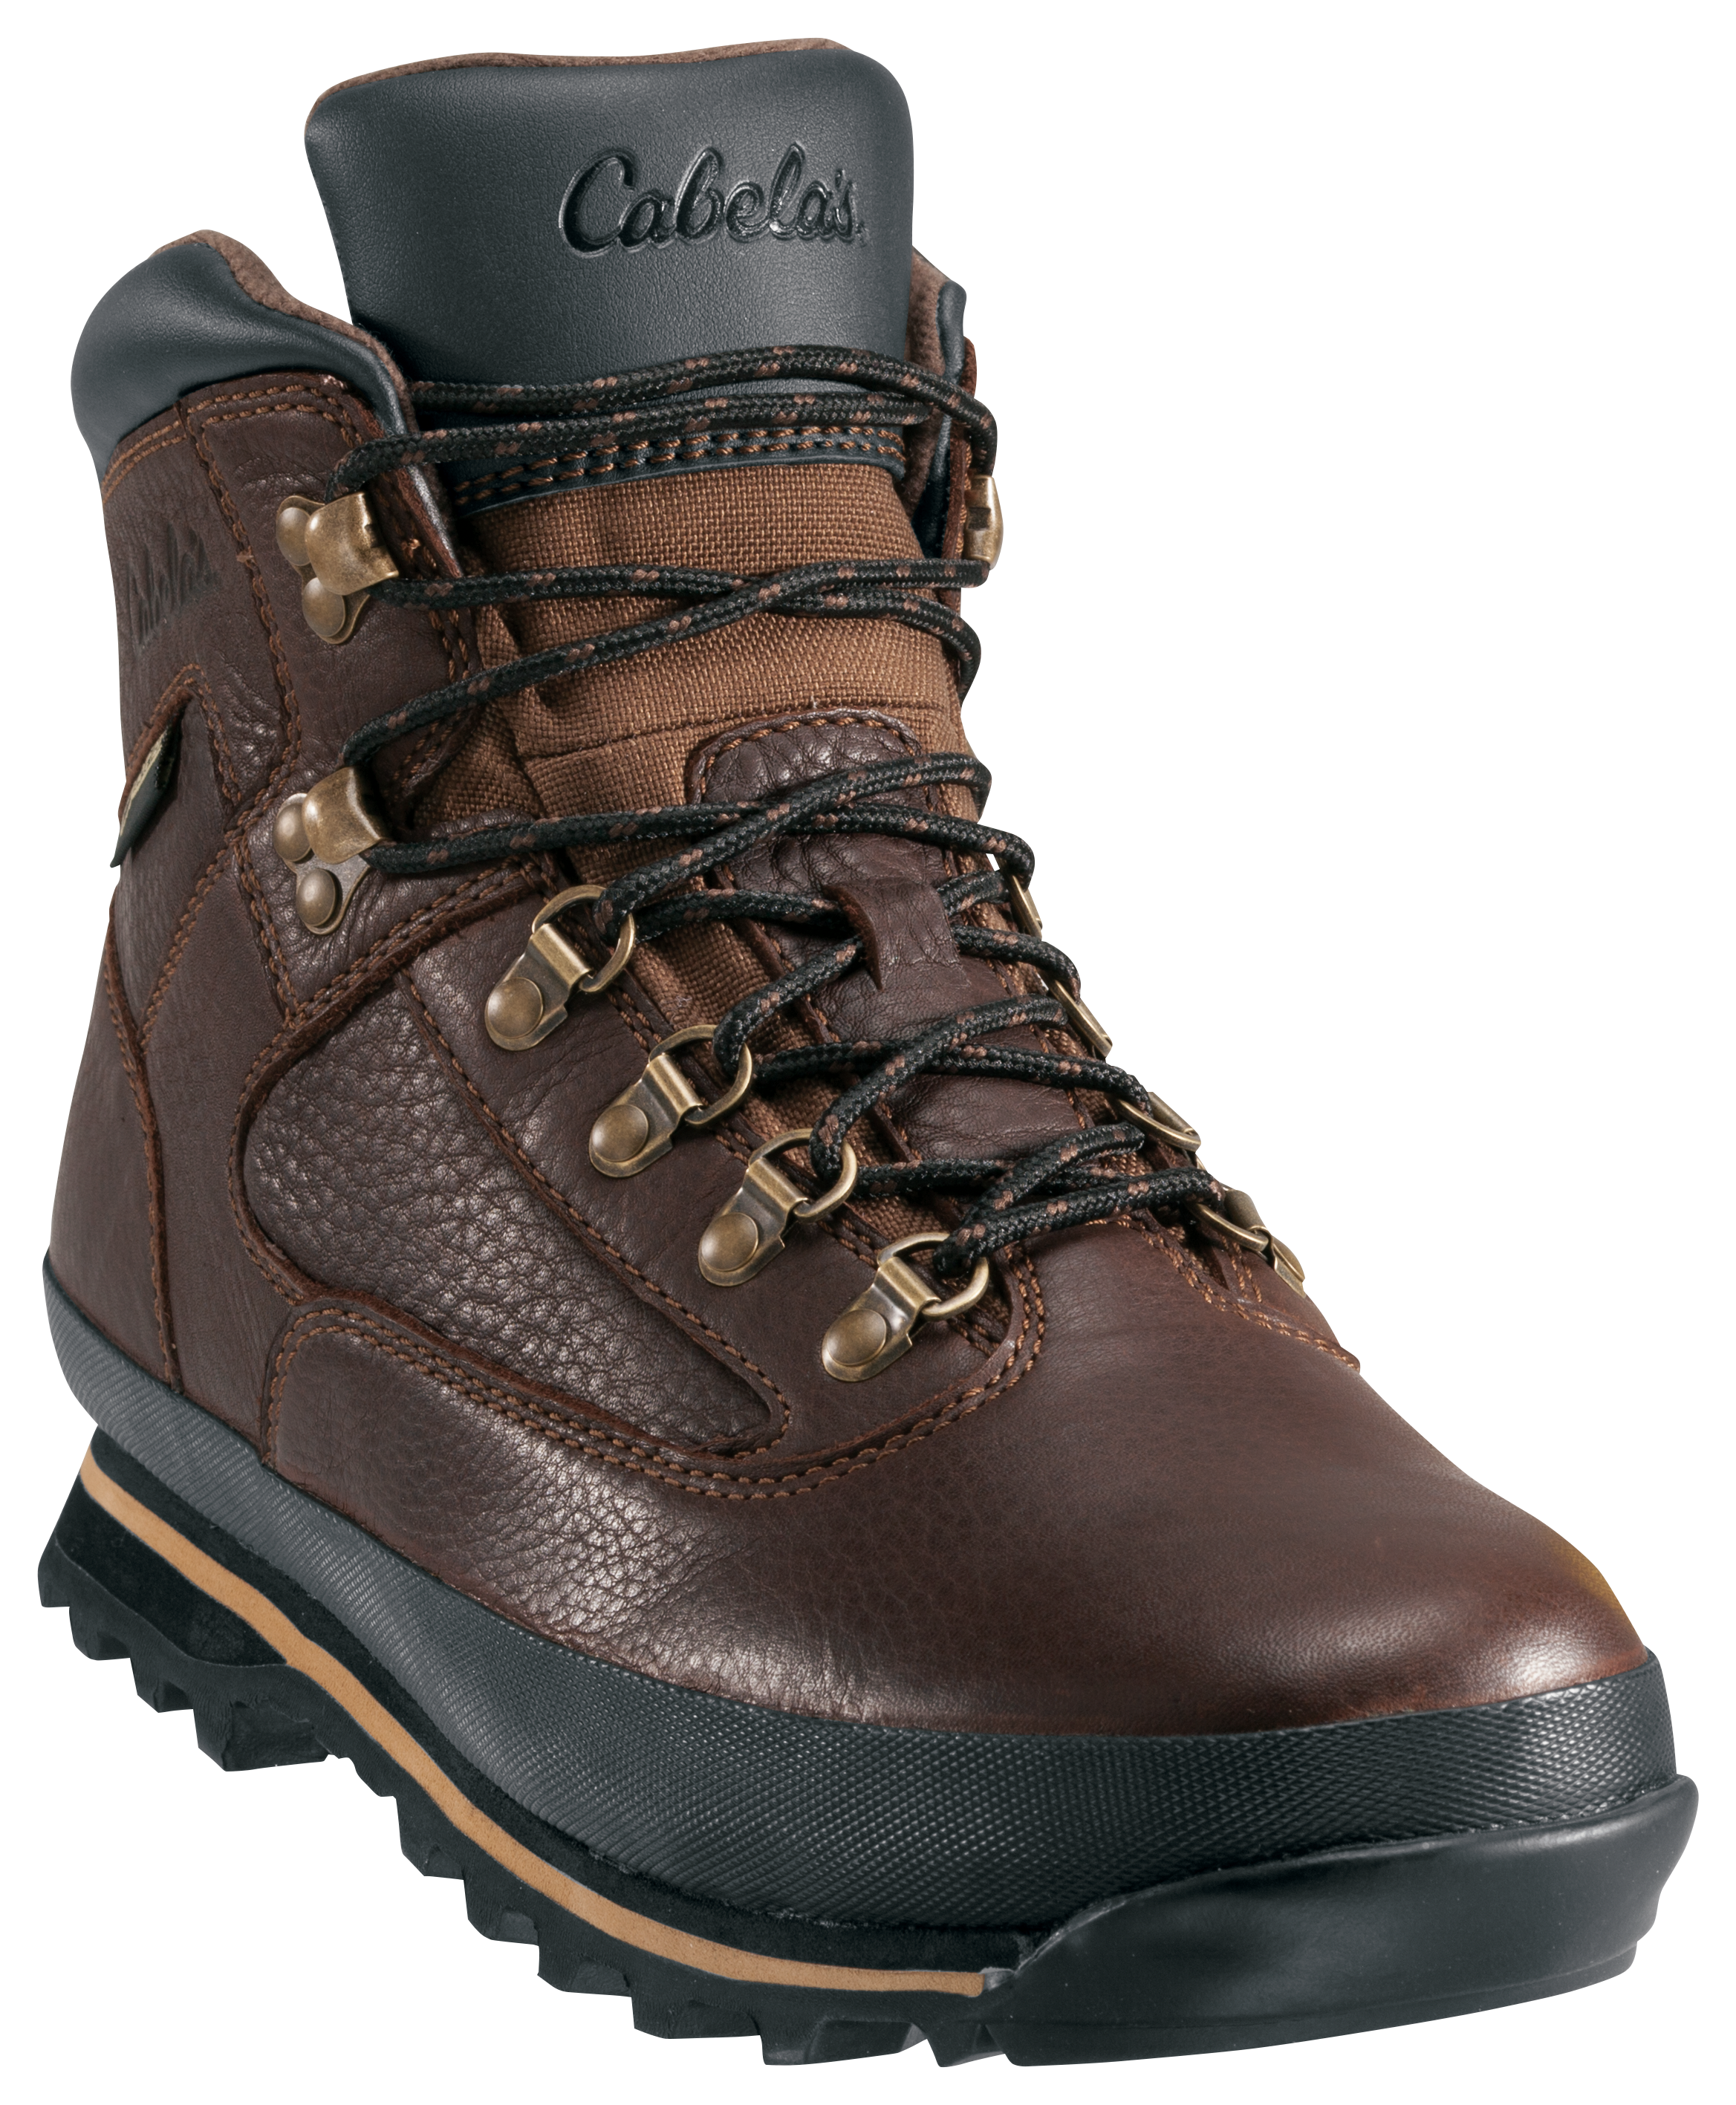 Cabela's Rimrock Mid GORE-TEX Hiking Boots for Men - Brown - 8.5M